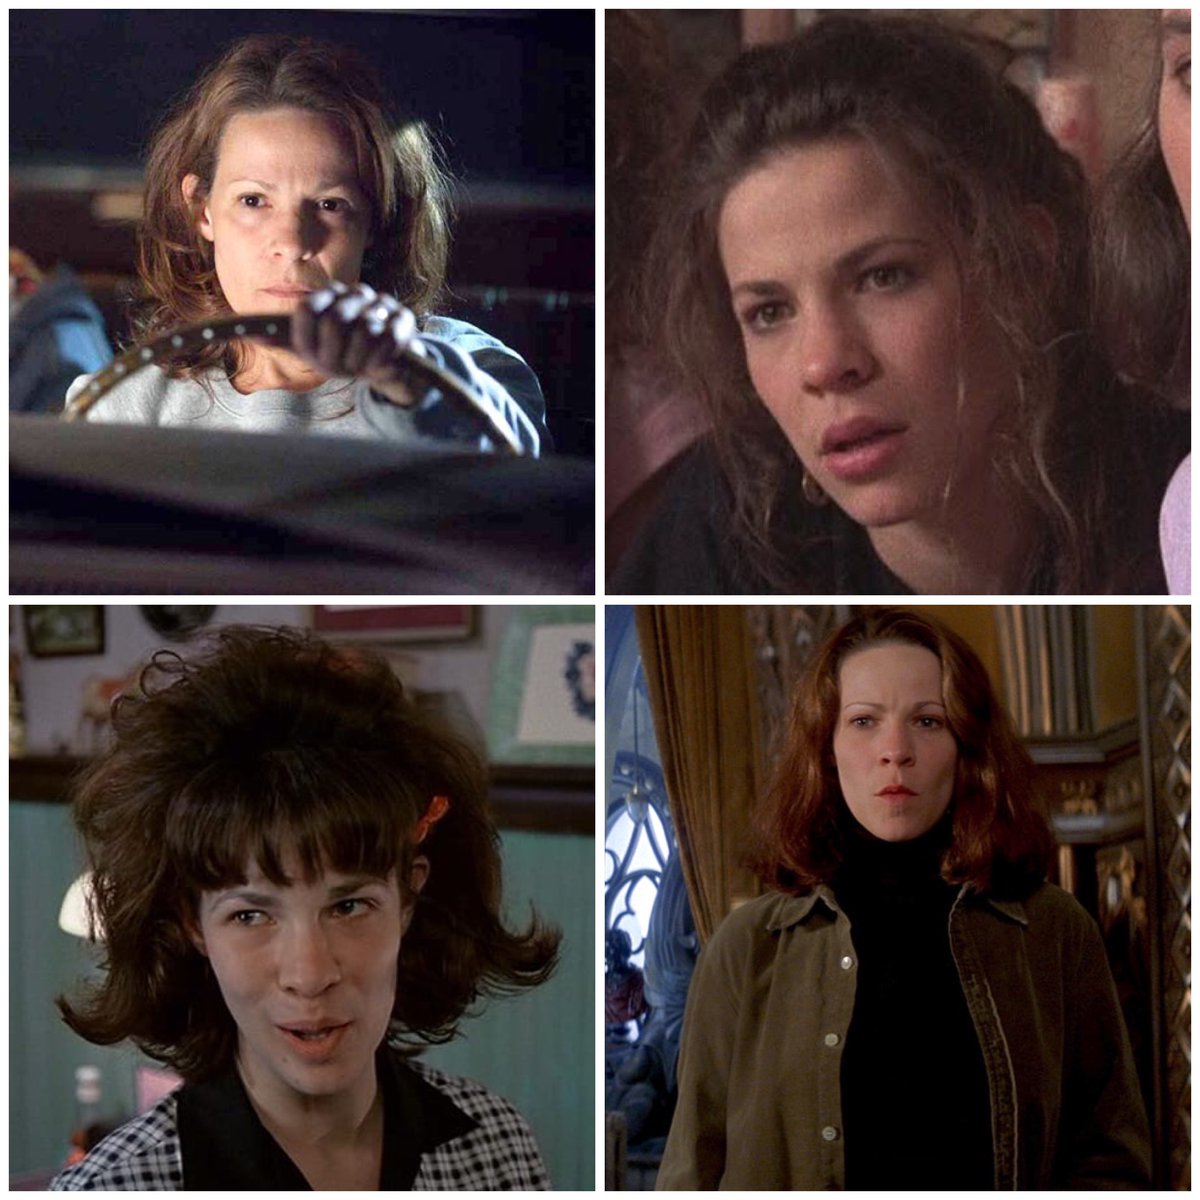 Happy birthday to Lili Taylor🎂 

The actress turns 57 today.

#LiliTaylor